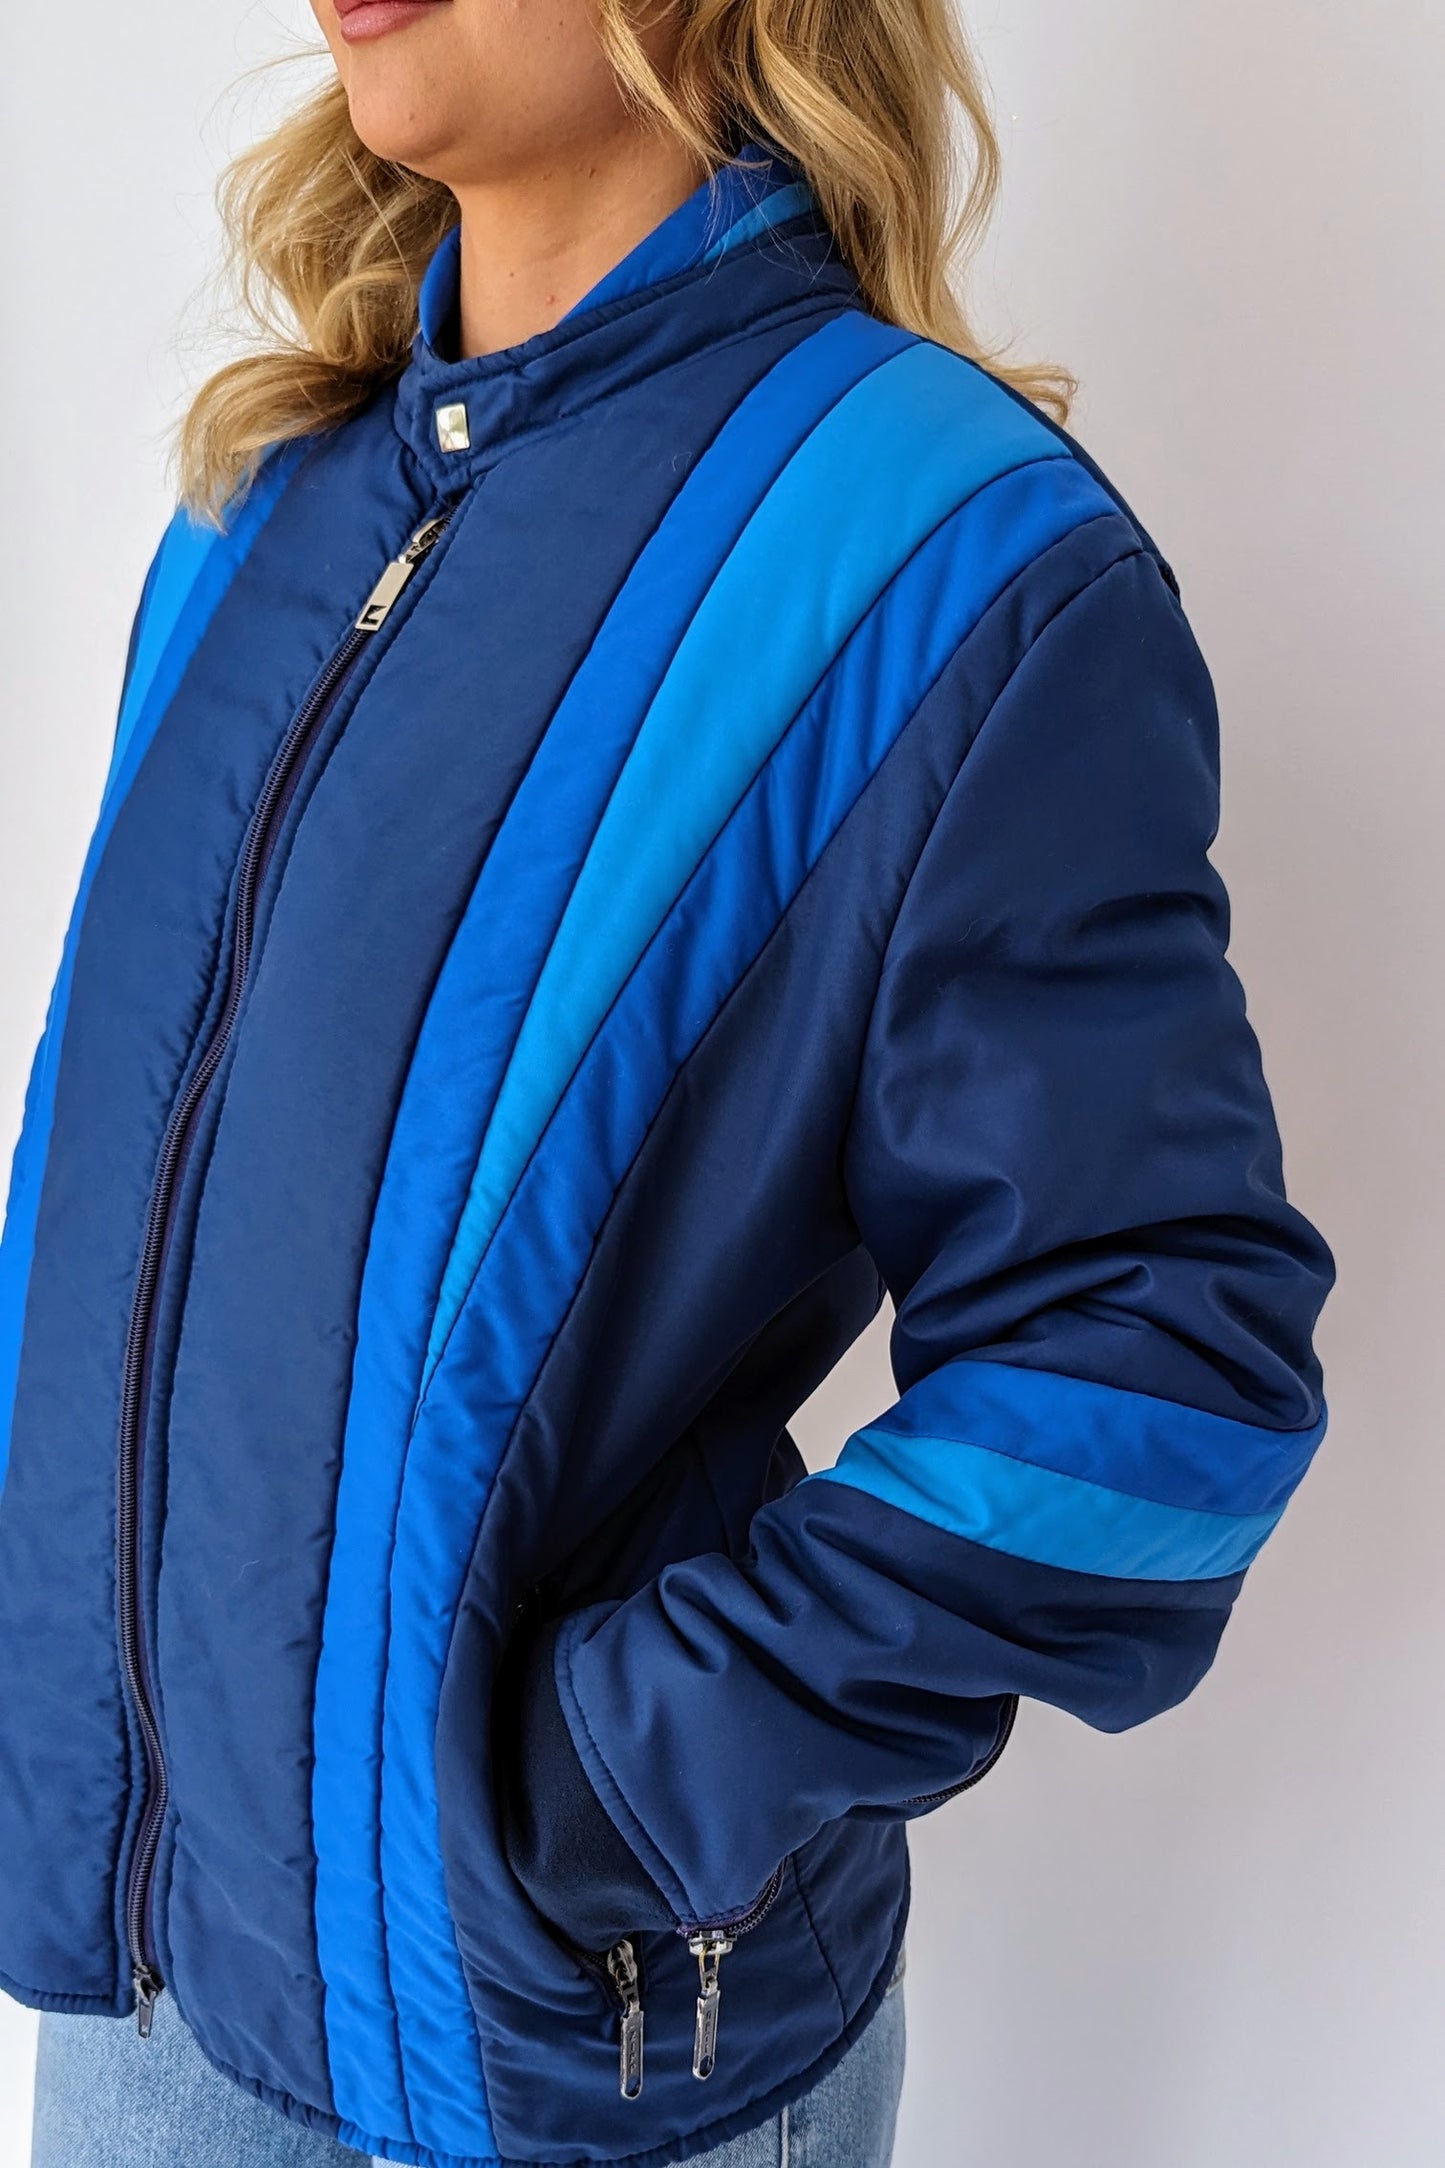 zipped up vintage blue puffer ski jacket with different tones of blue stripes on front, sleeves and neck